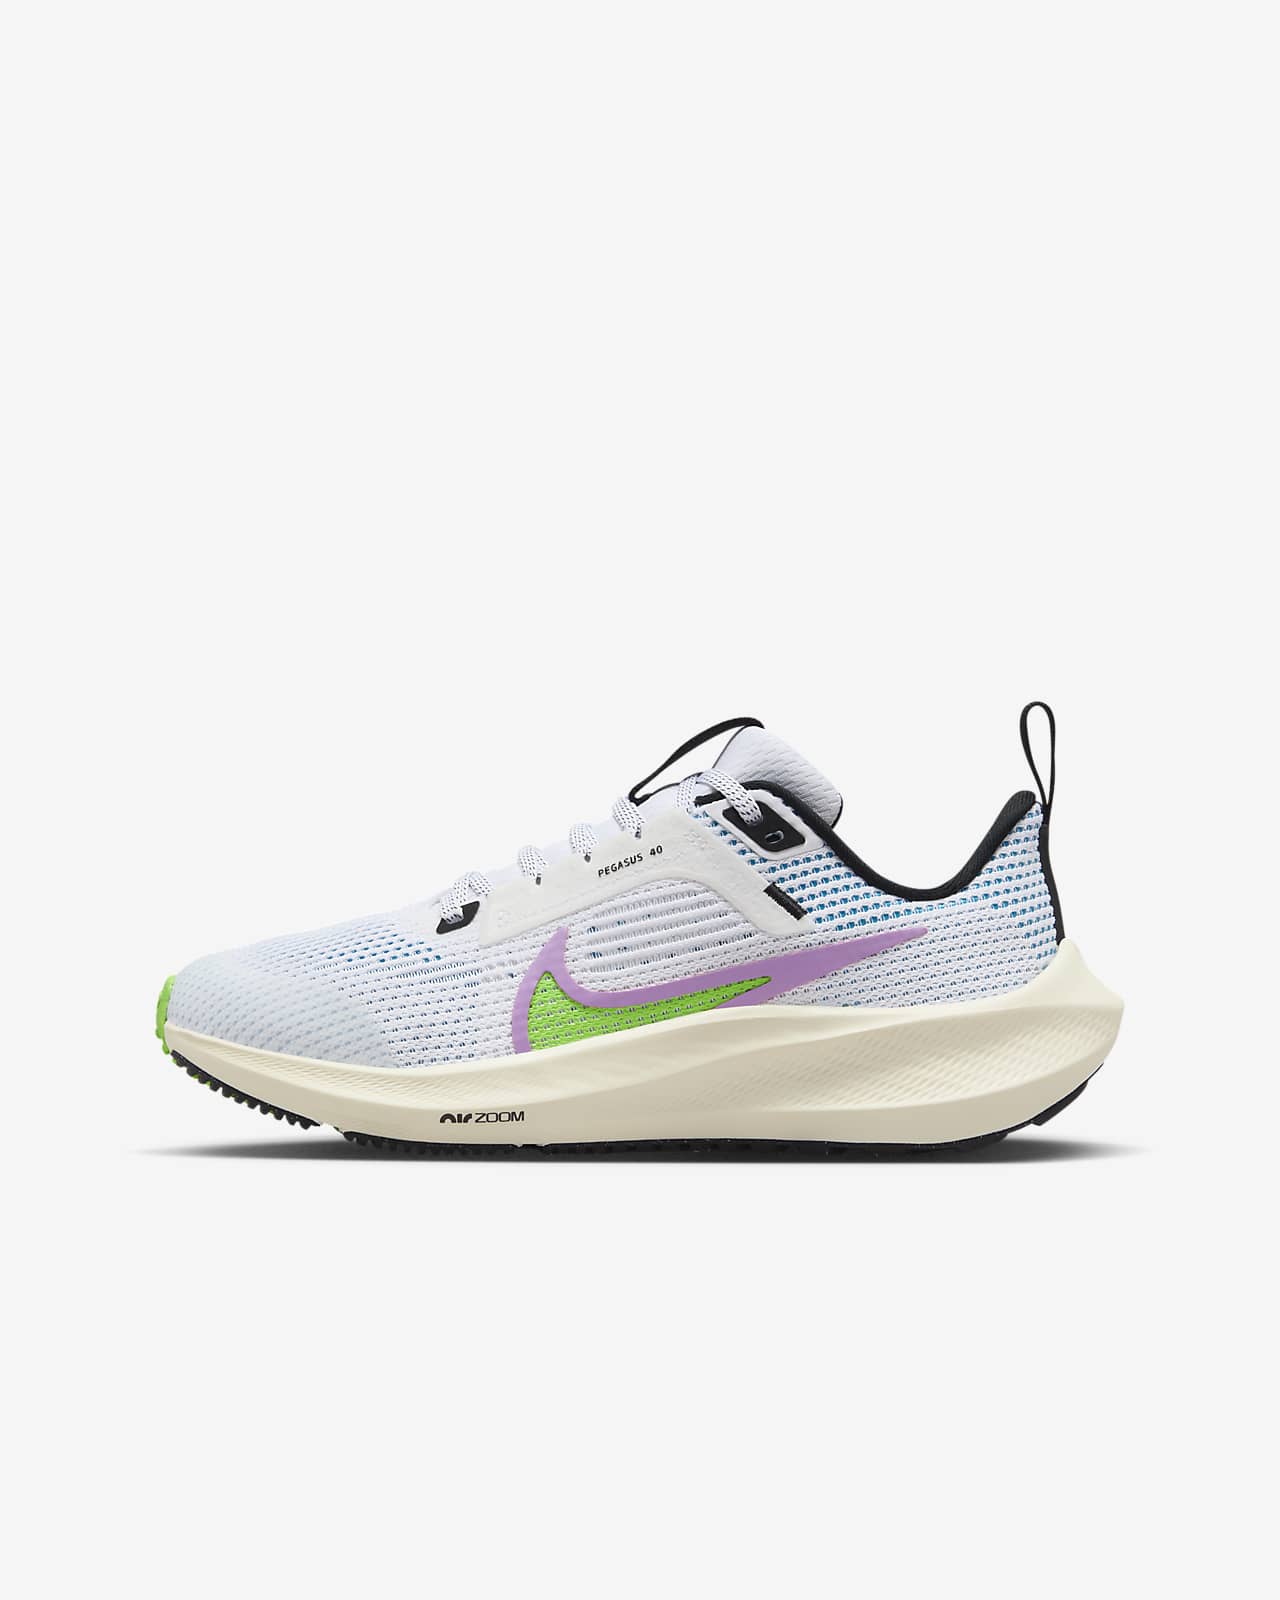 Nike Running Shoes | Curbside Pickup Available at DICK'S